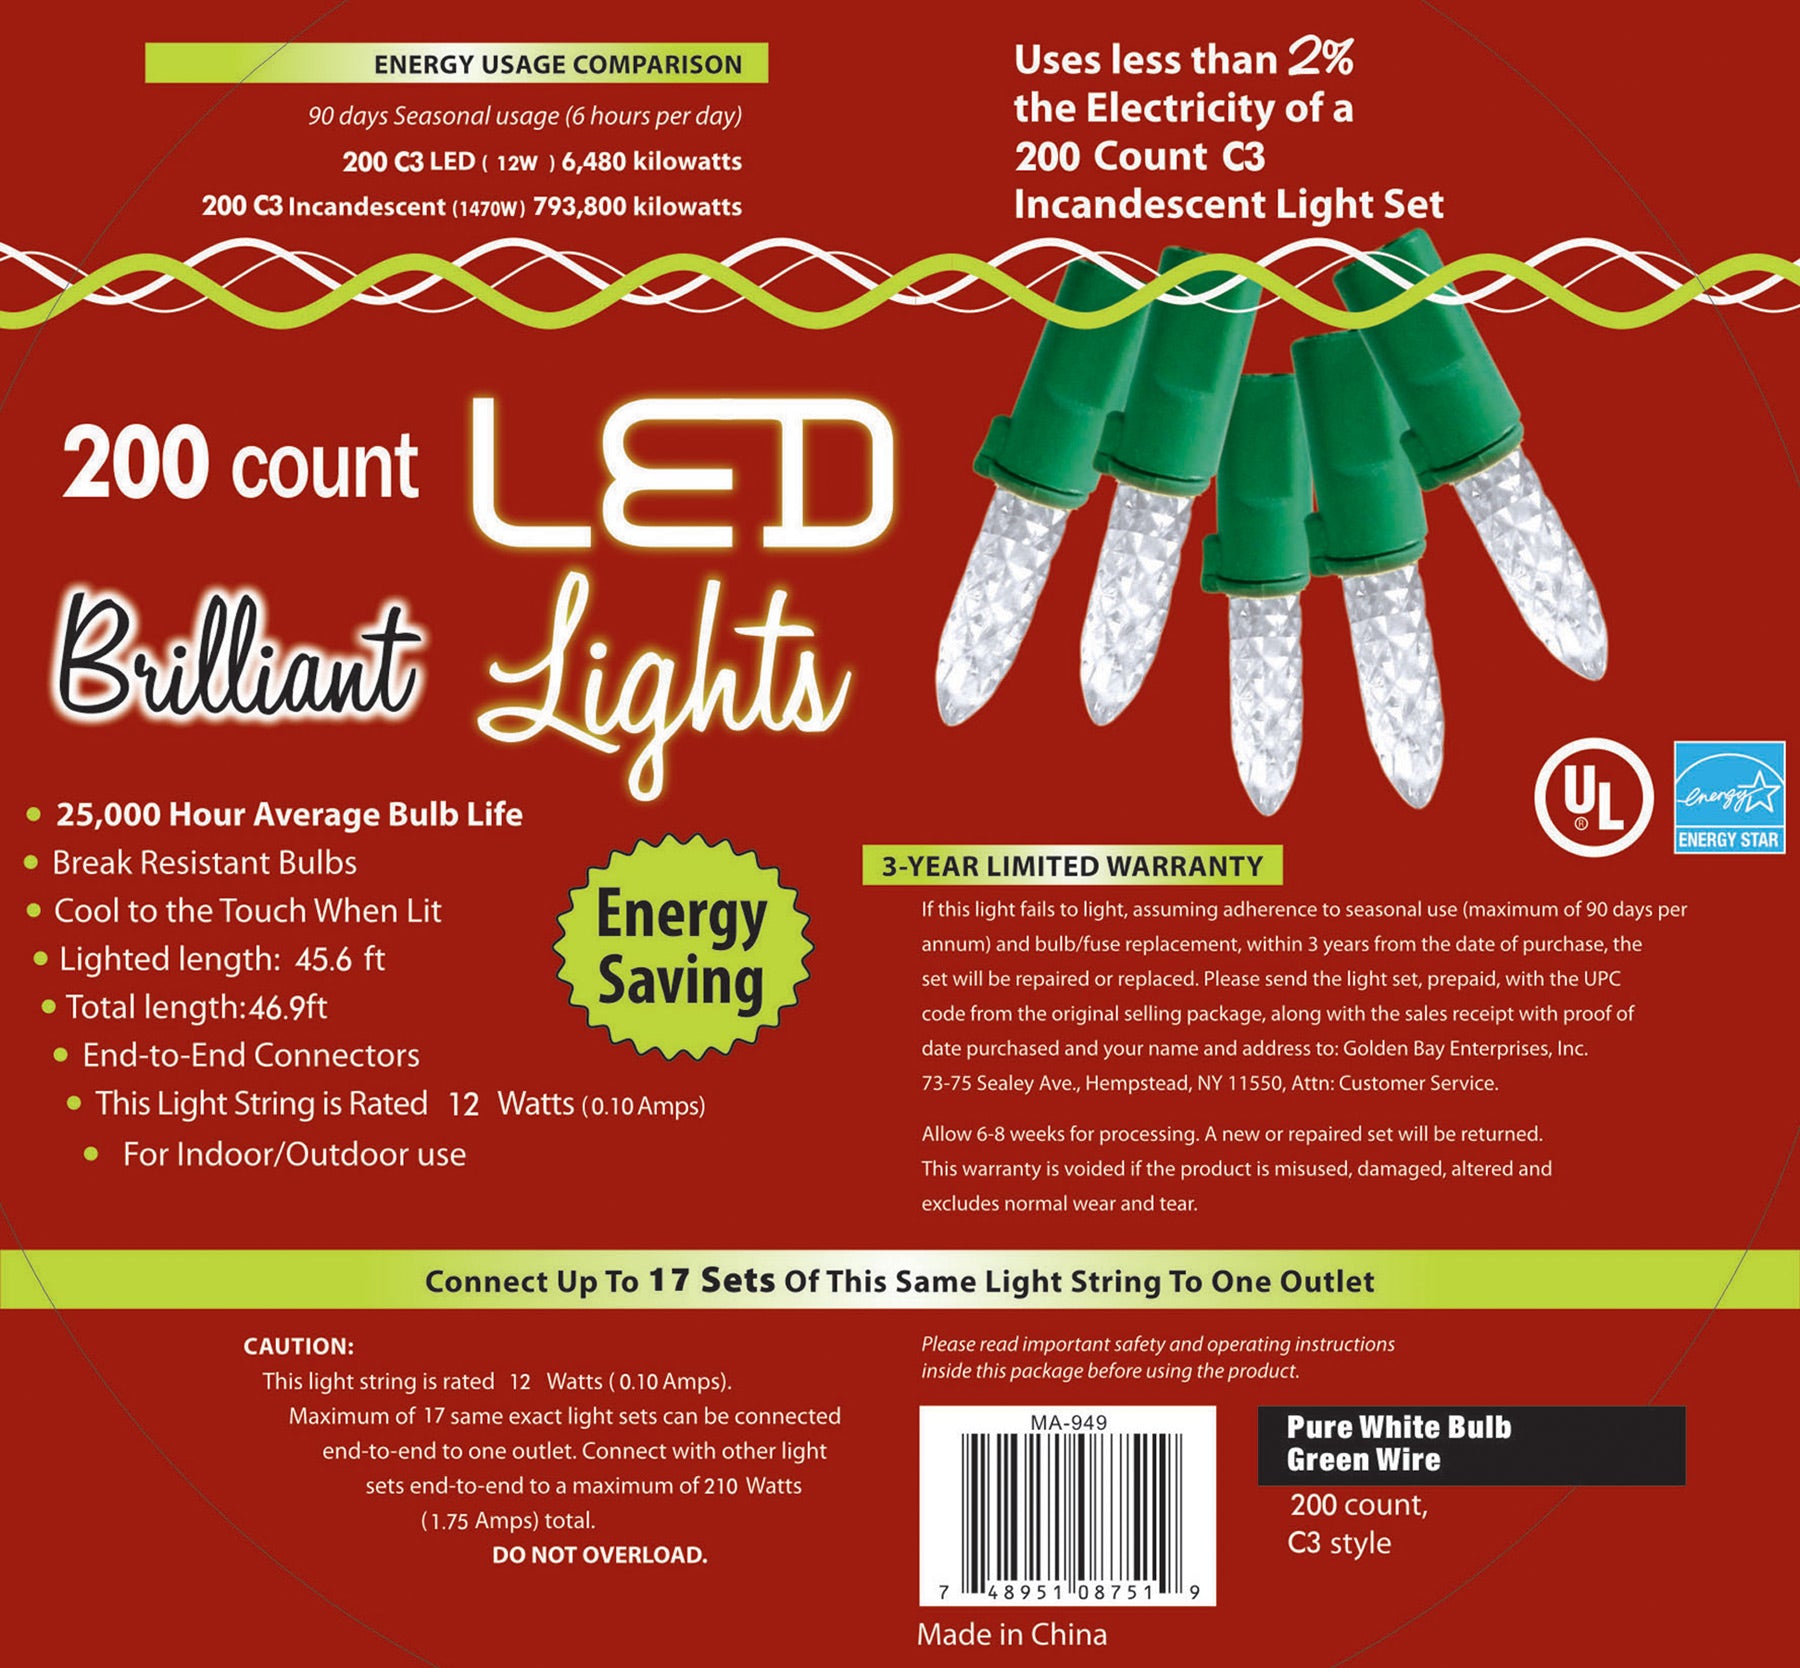 Holiday Lights 200 count LED Brilliant White